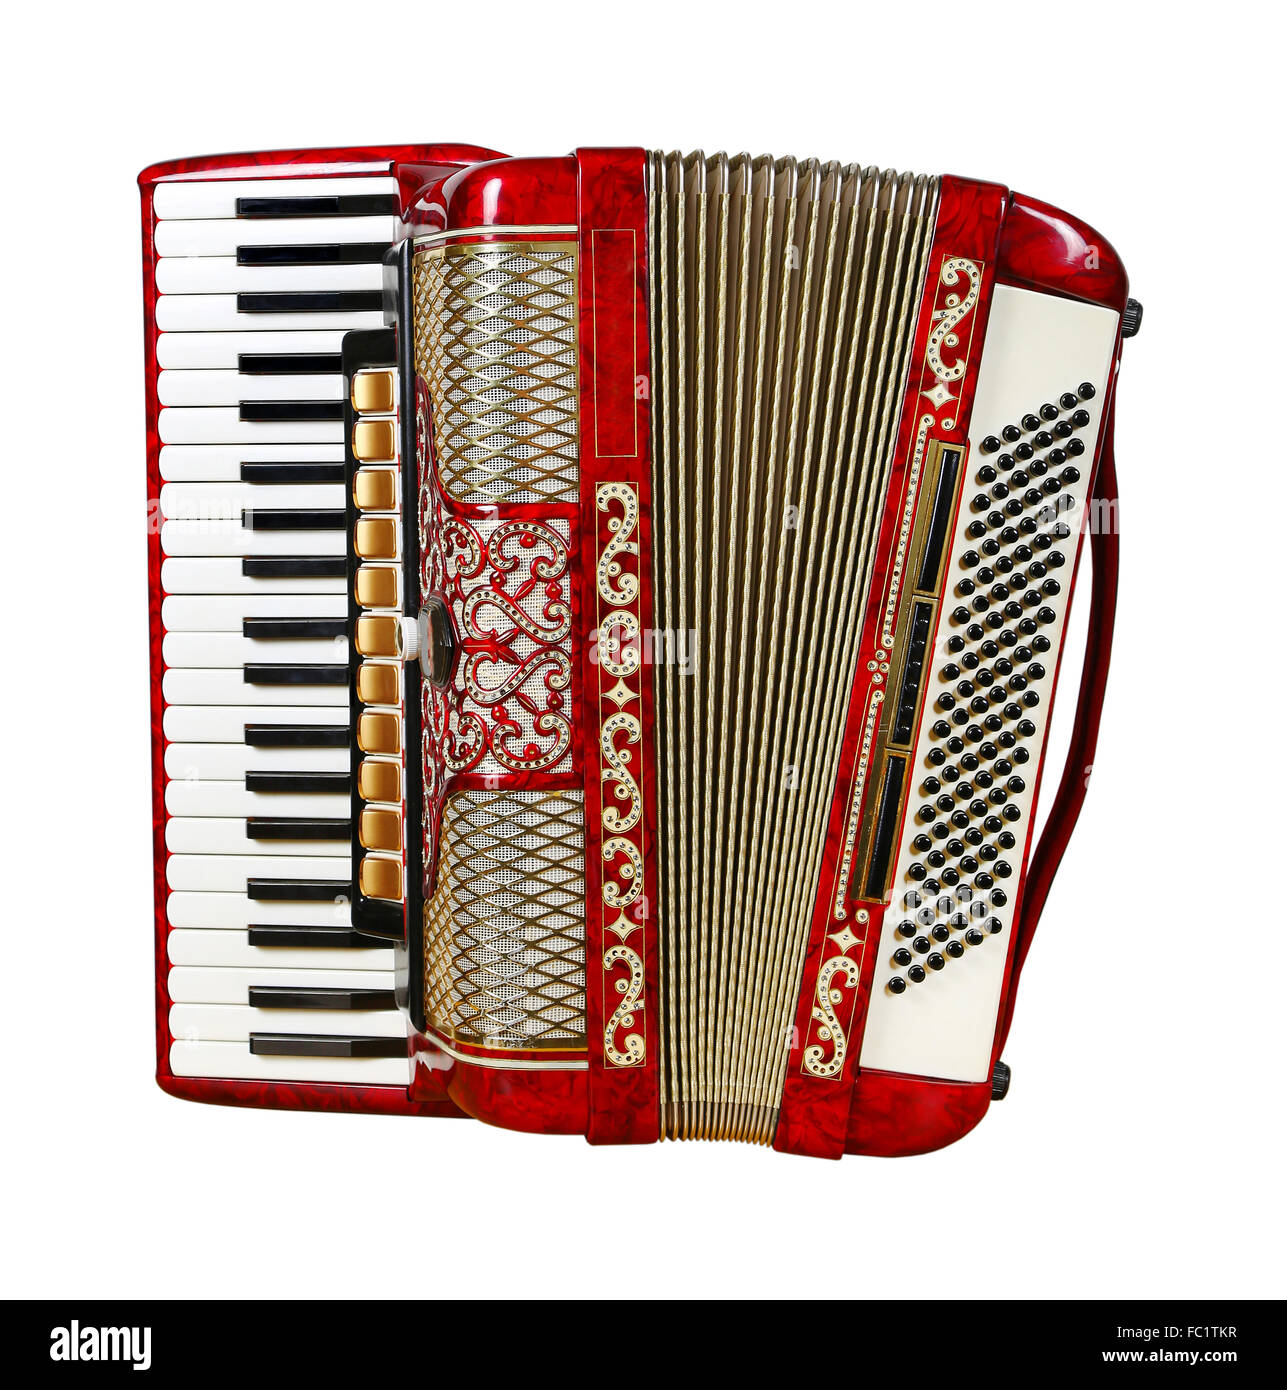 accordion, front view Stock Photo